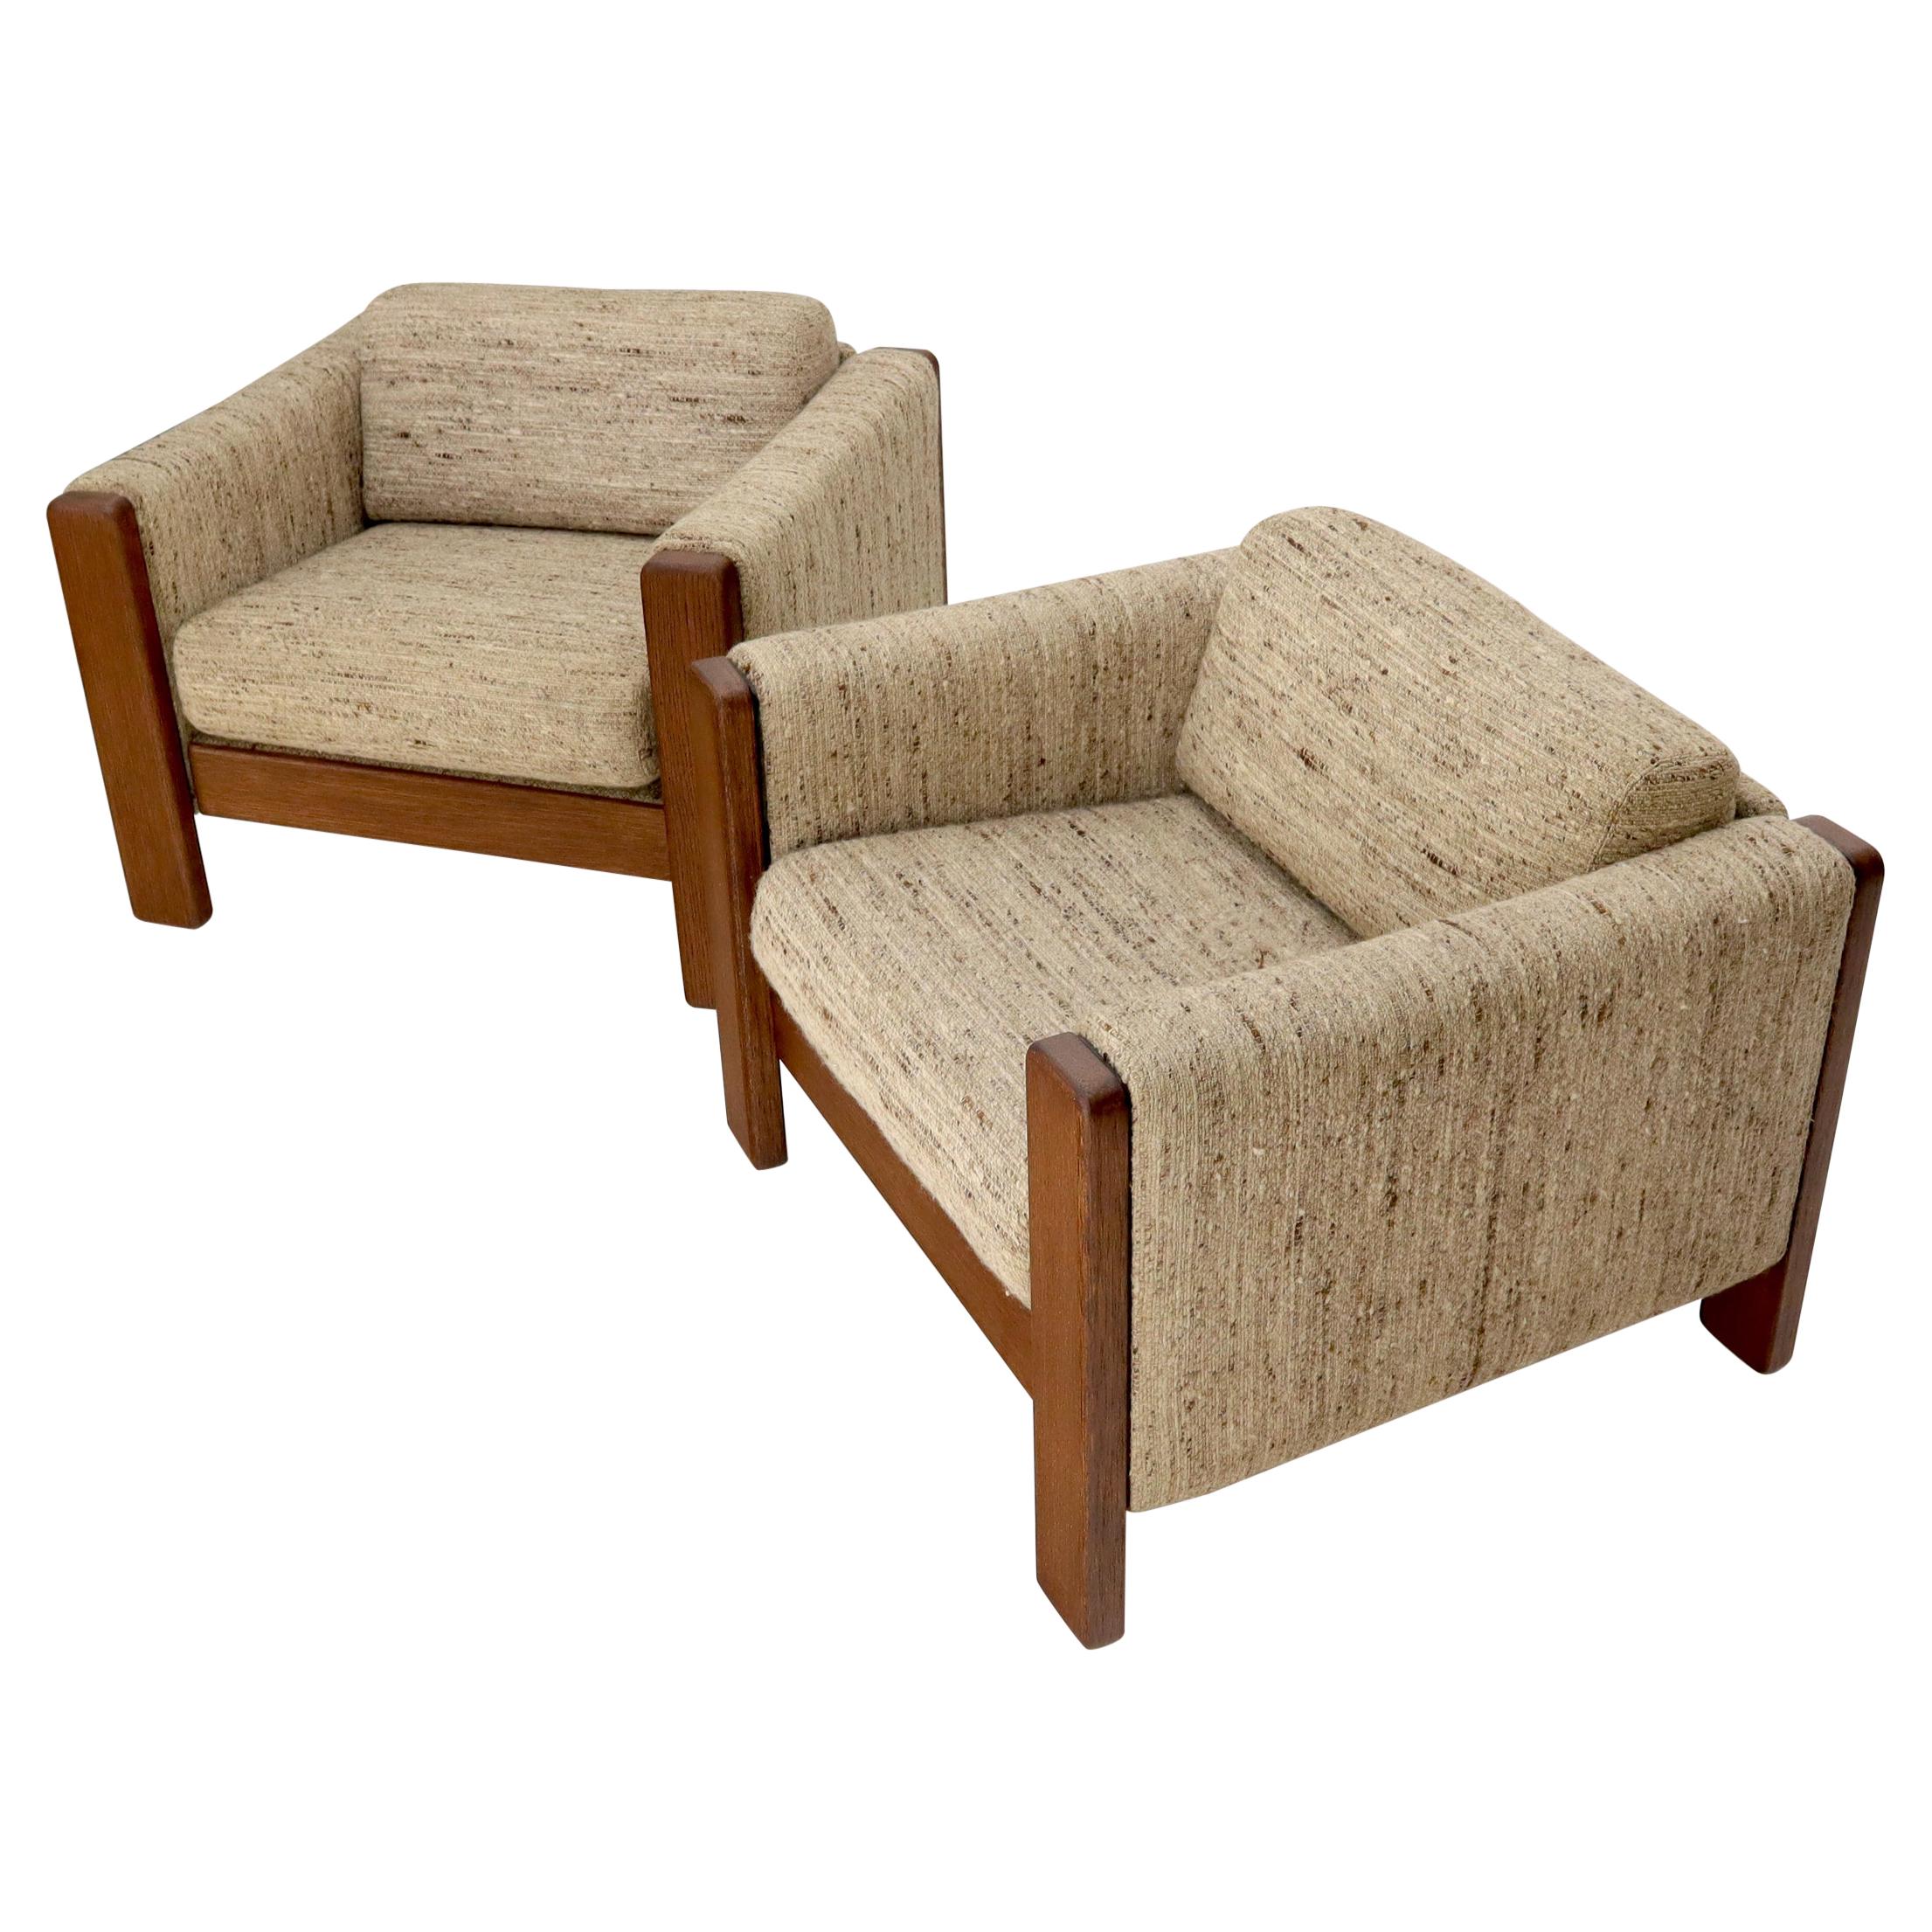 Pair of Knoll Wool Upholstery Cube Shape Lounge Club Chairs Teak Arms